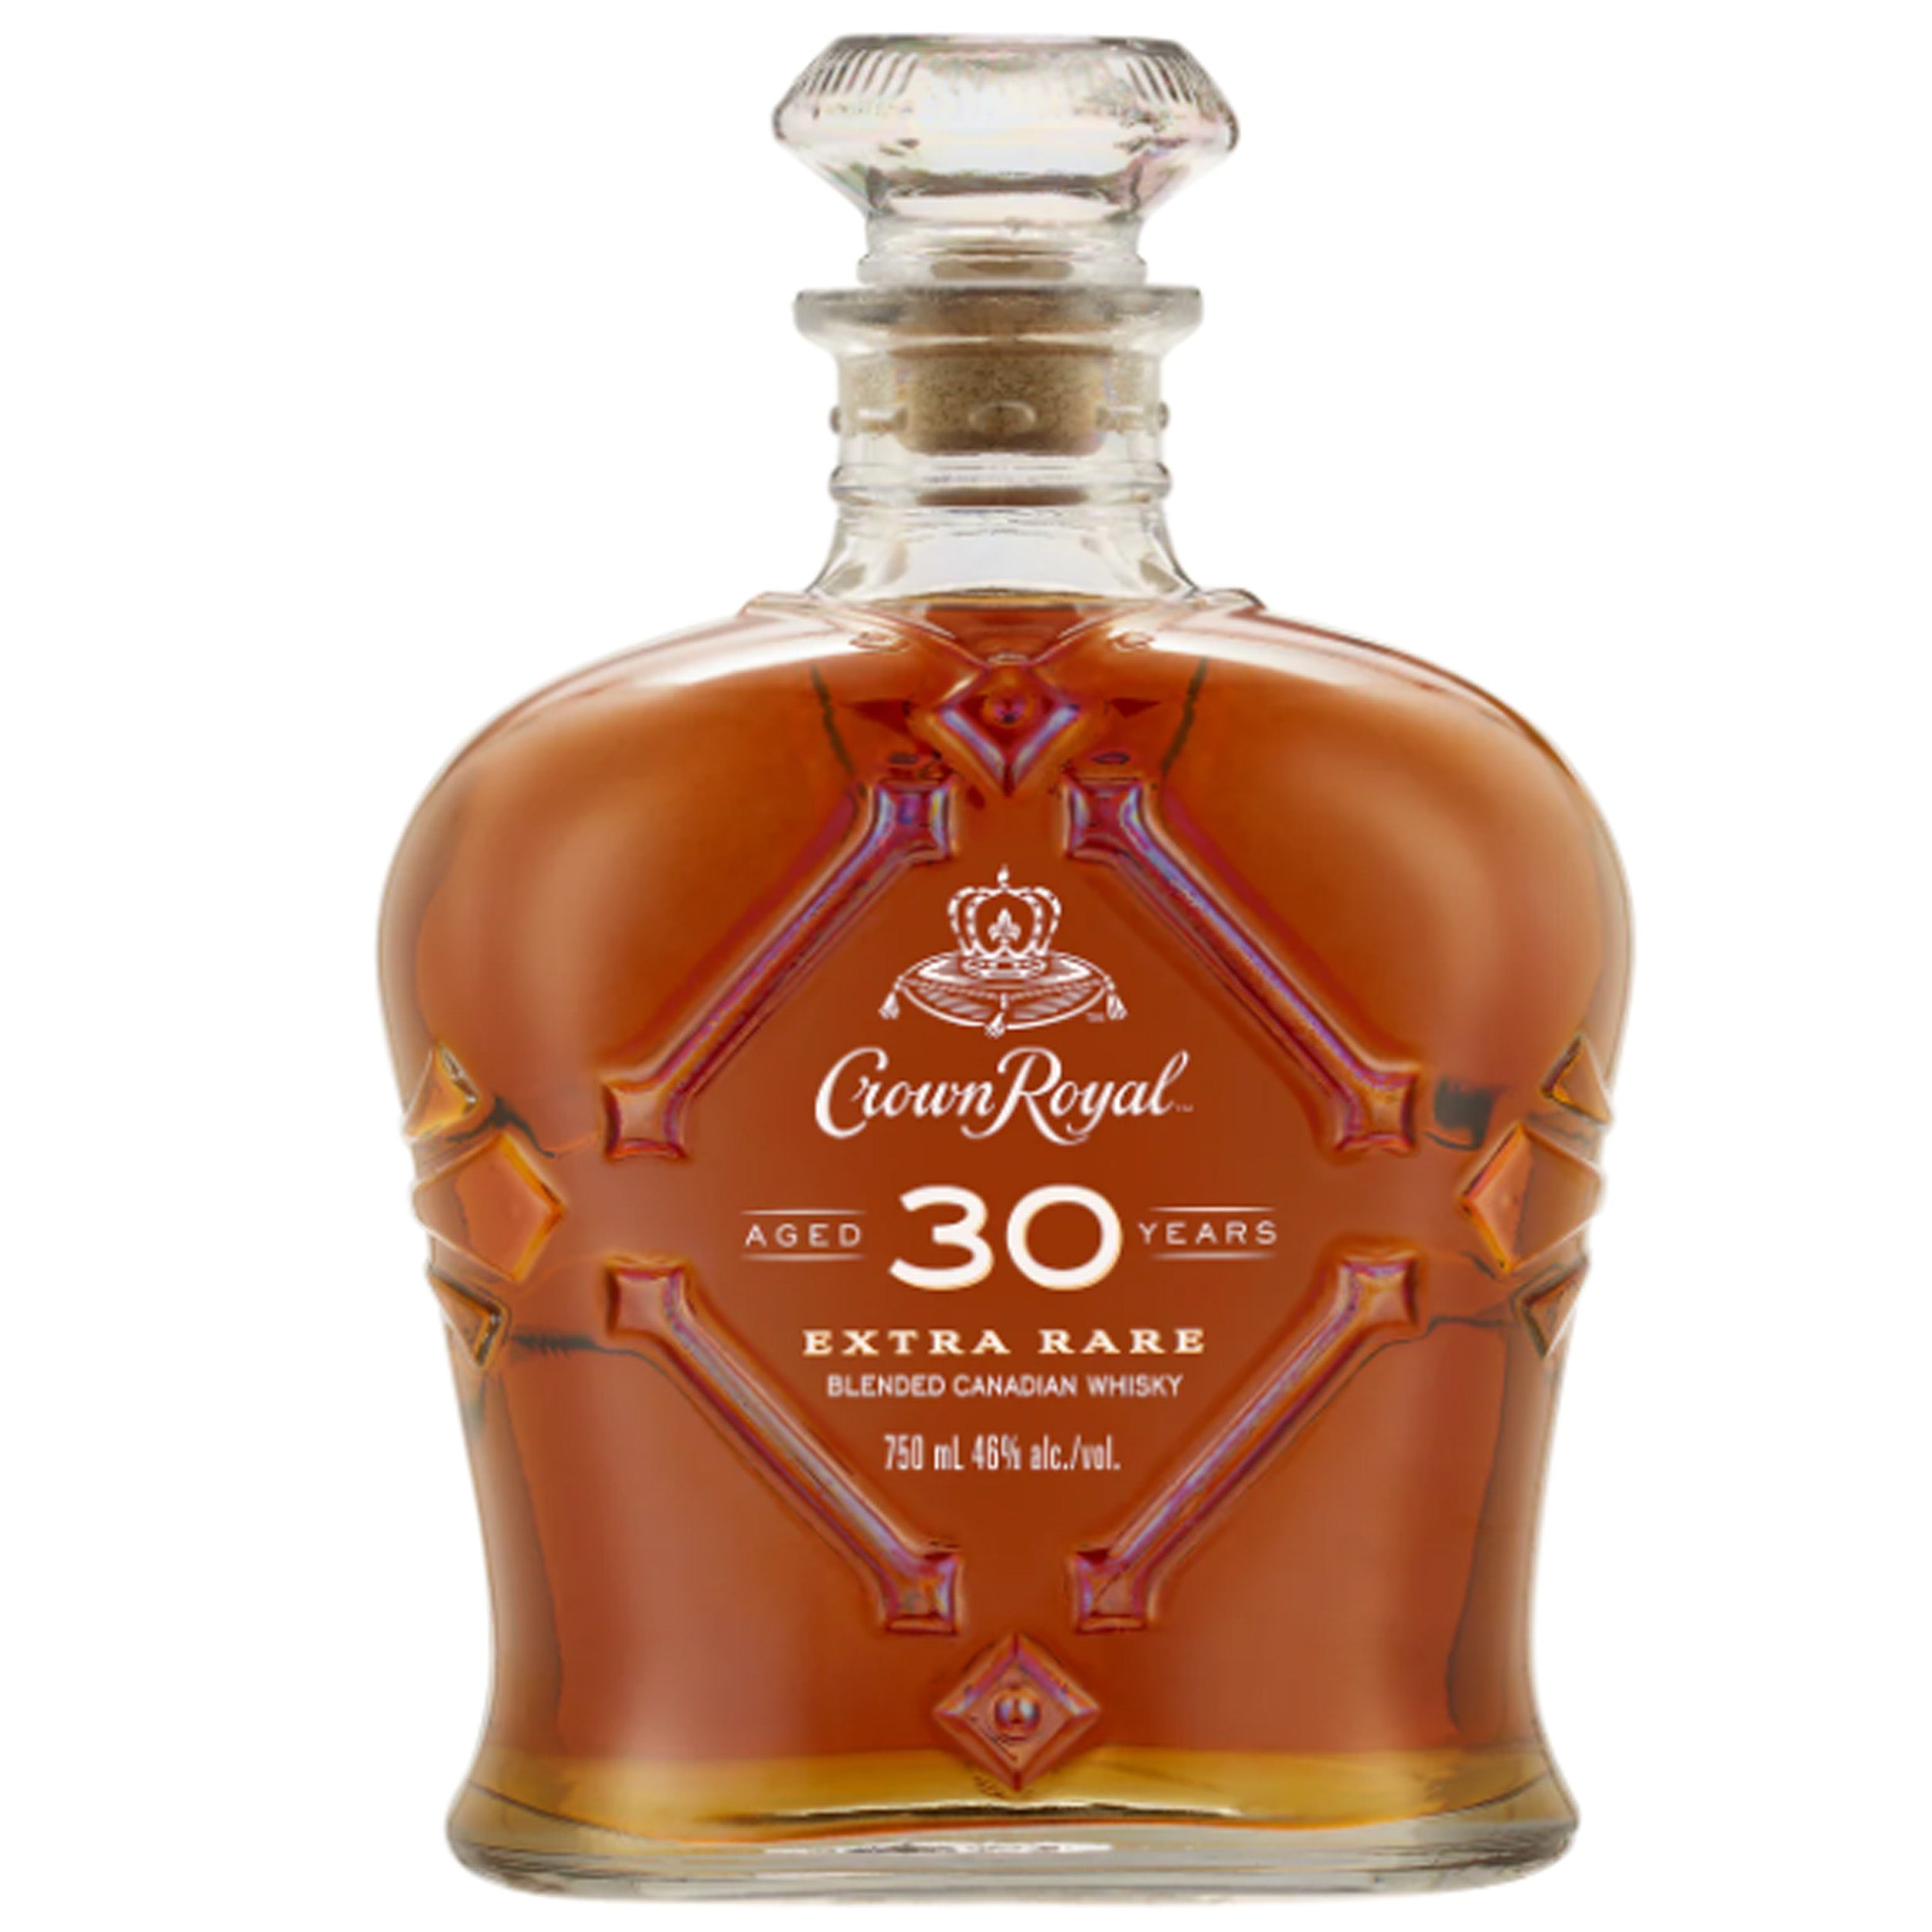 Crown Royal 30 Year Canadian Whisky